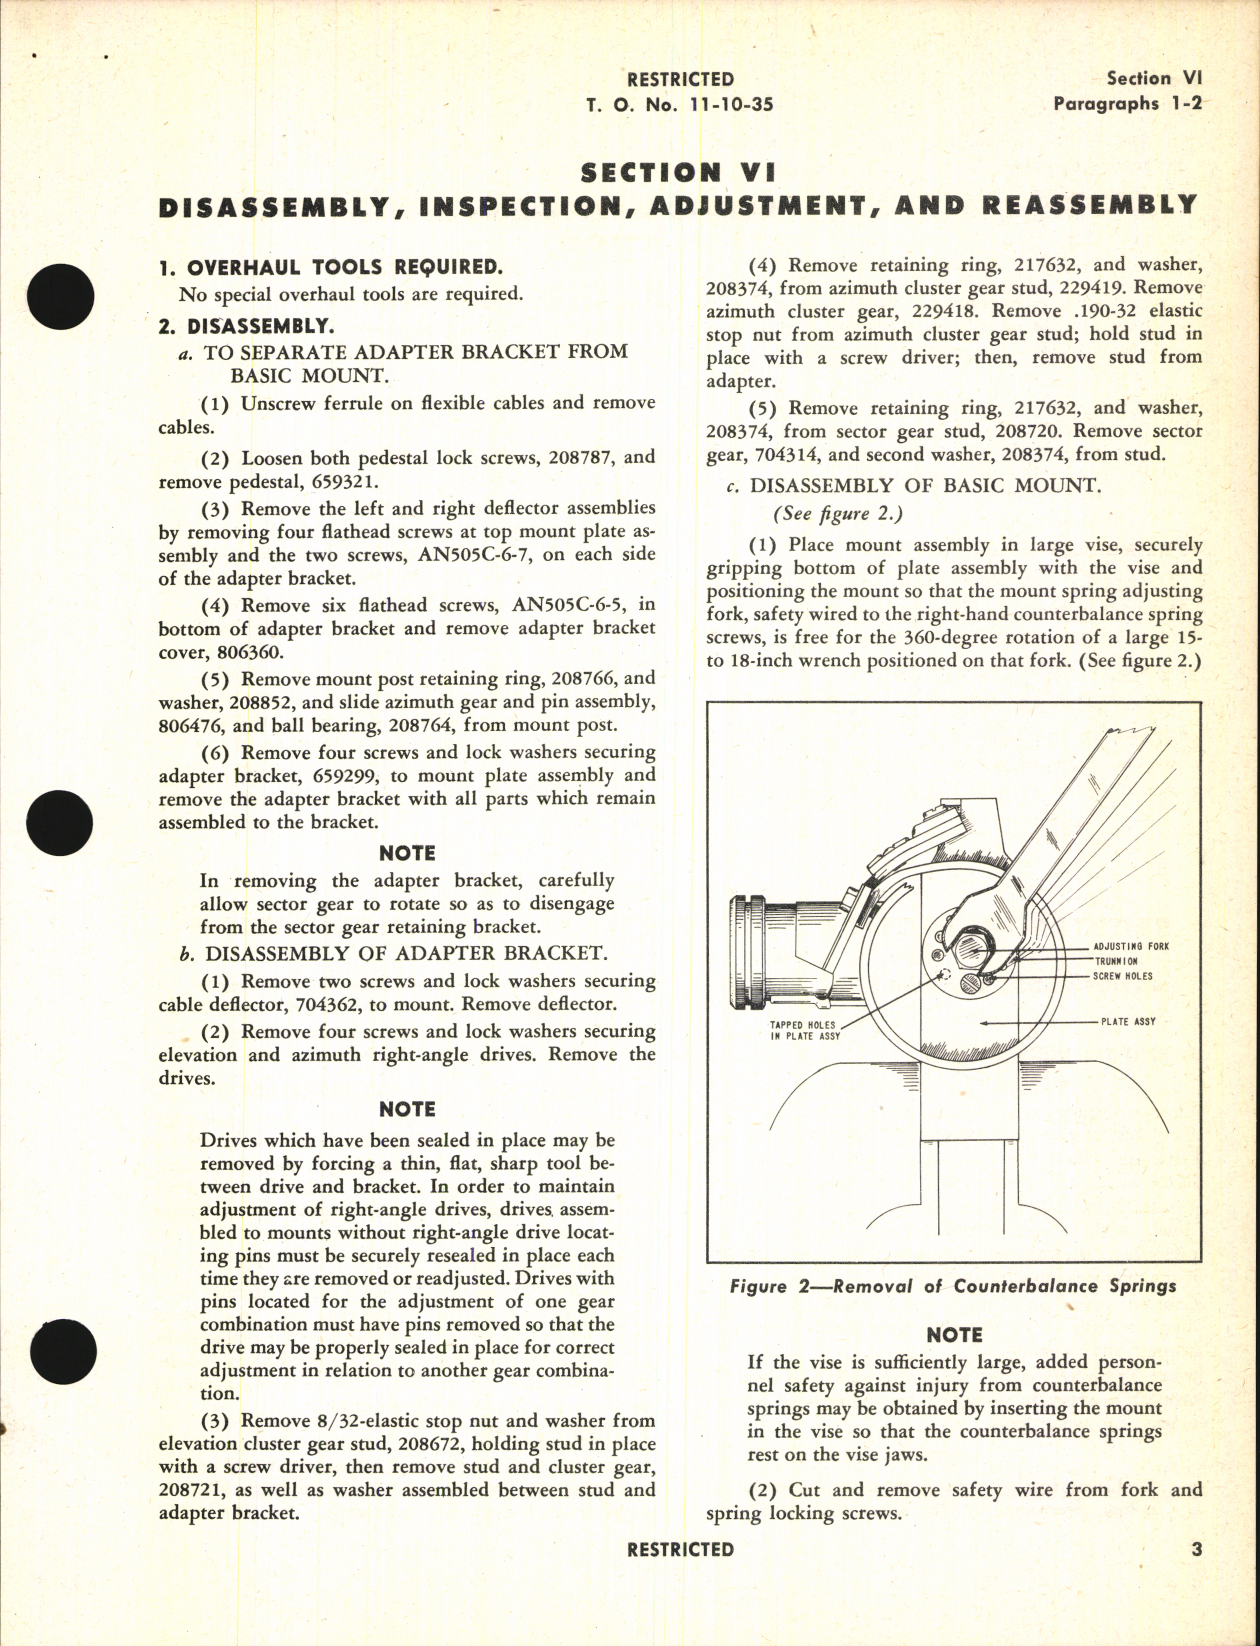 Sample page 7 from AirCorps Library document: Handbook of Instructions with Parts Catalog for Gun Mount Type K-7